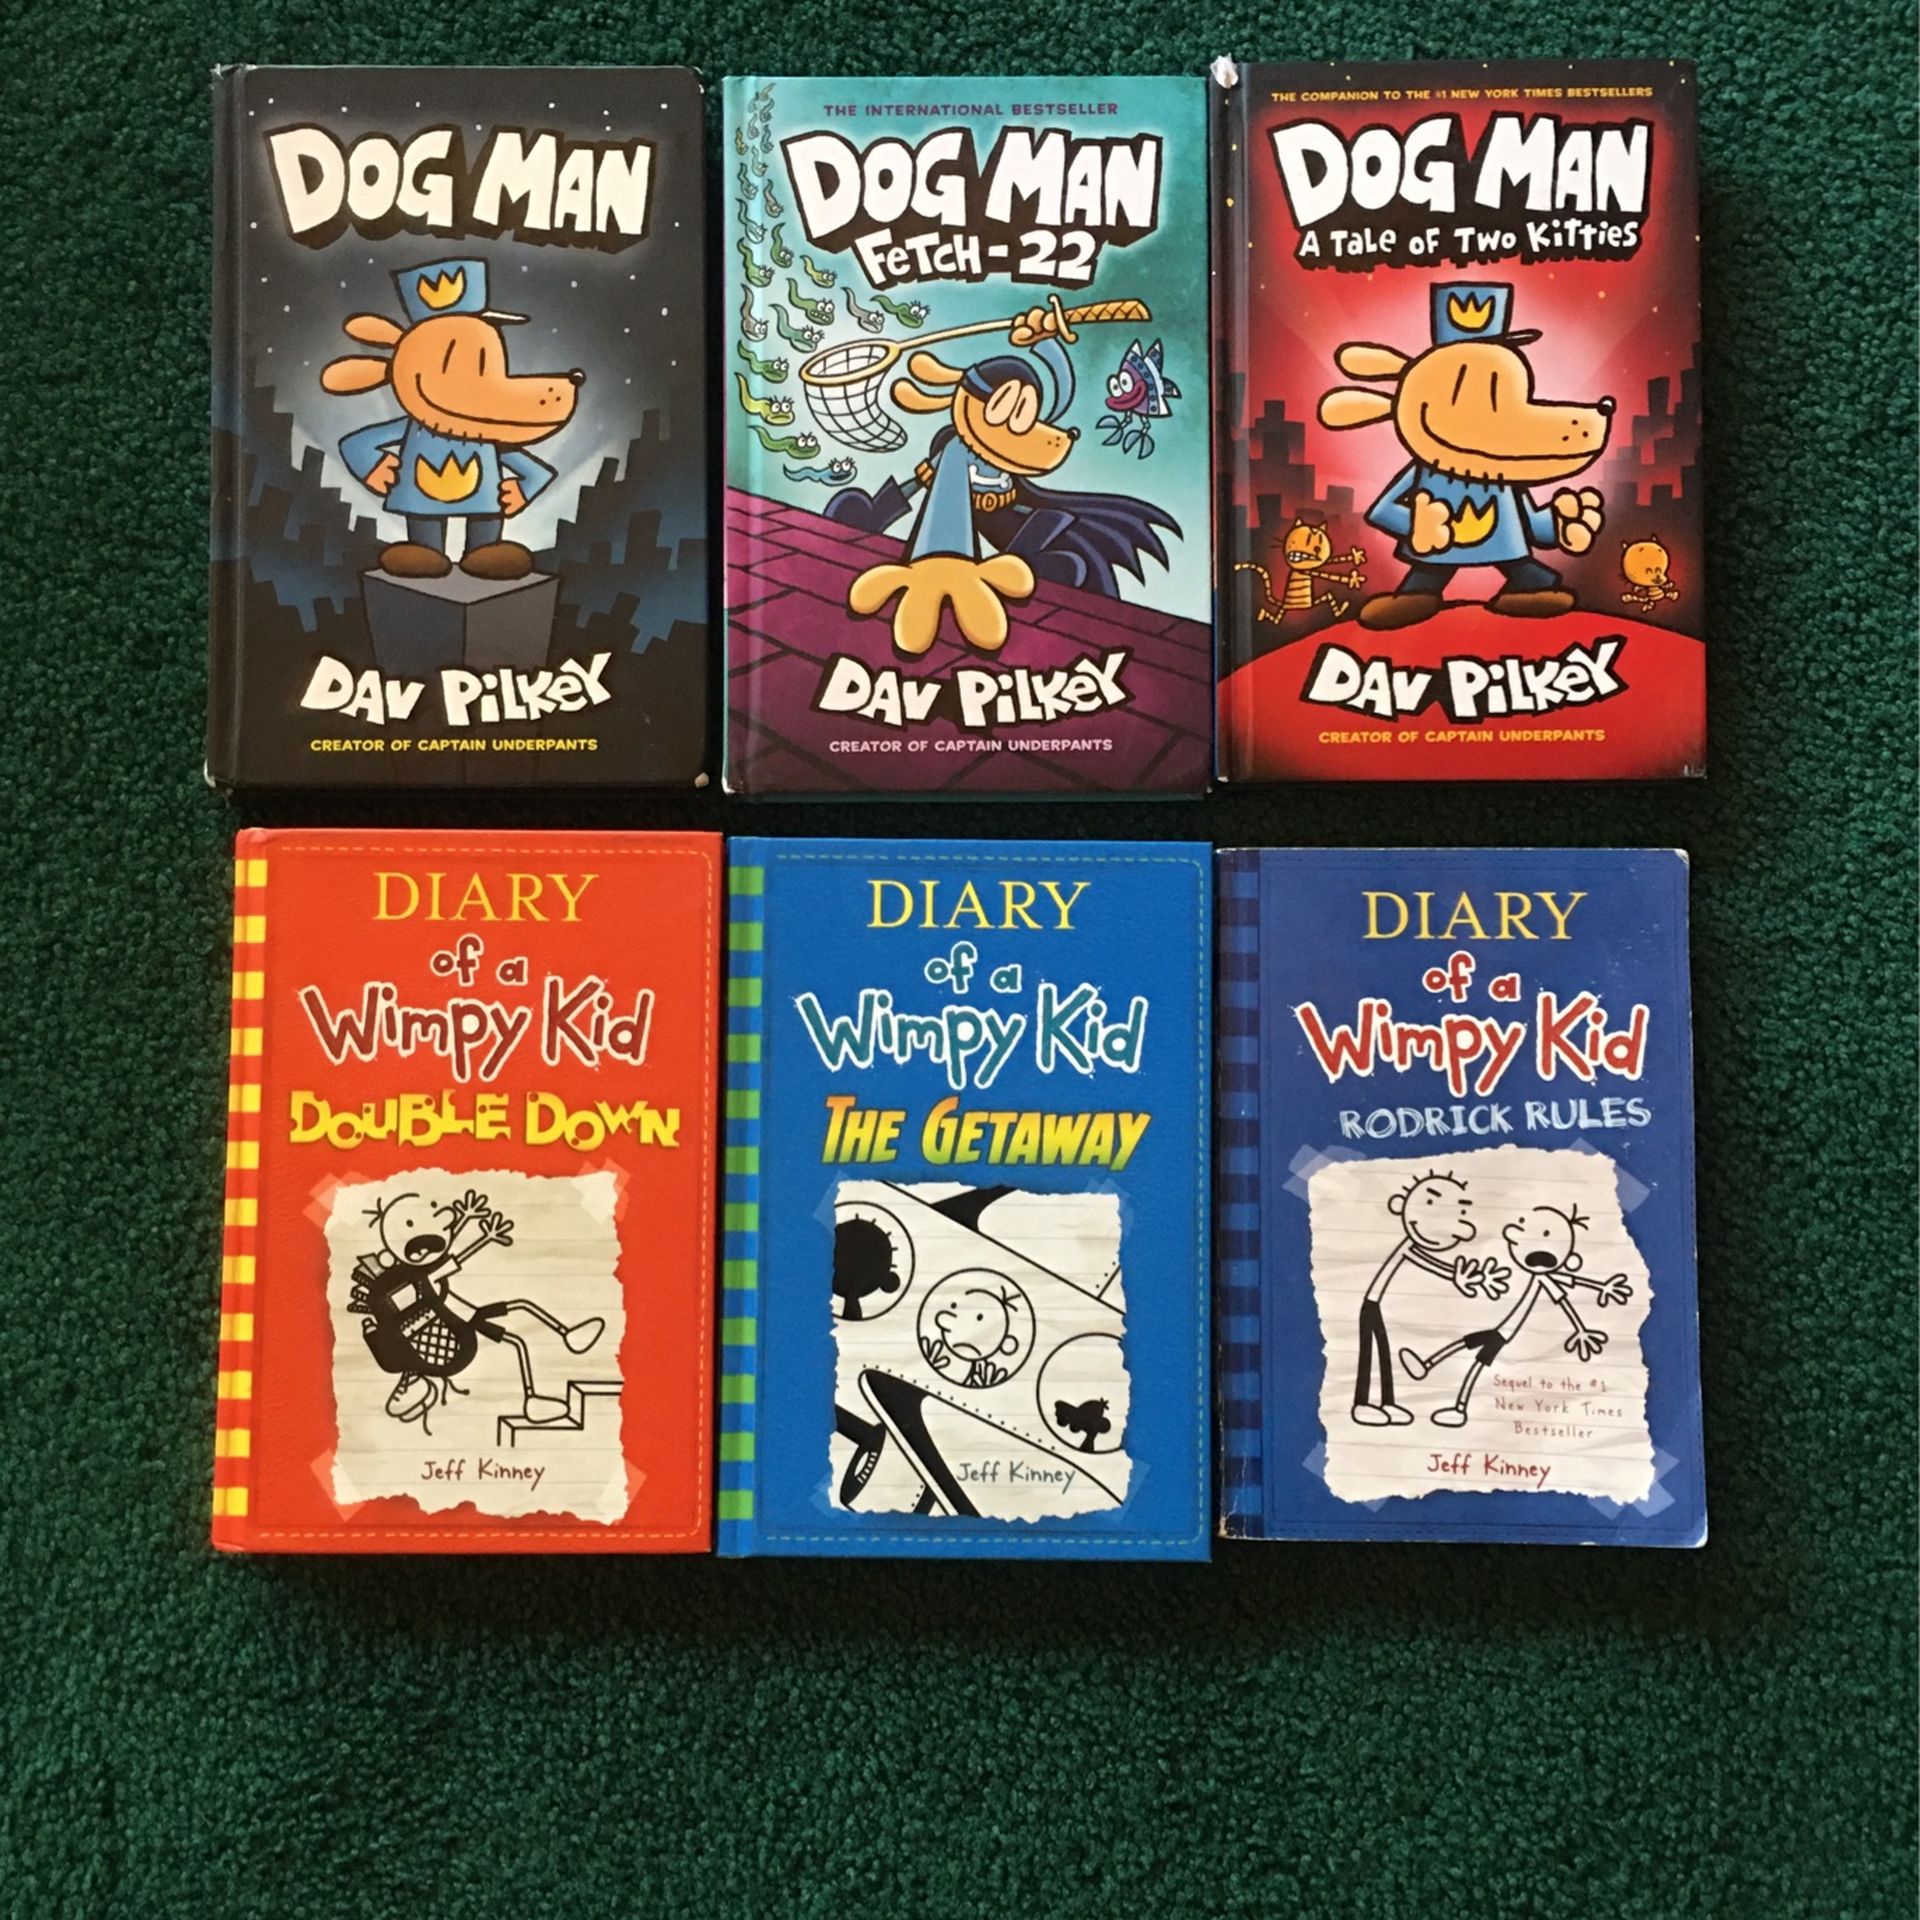 Reserved For Larry—-Dog Man and Diary of a Wimpy Kid Books